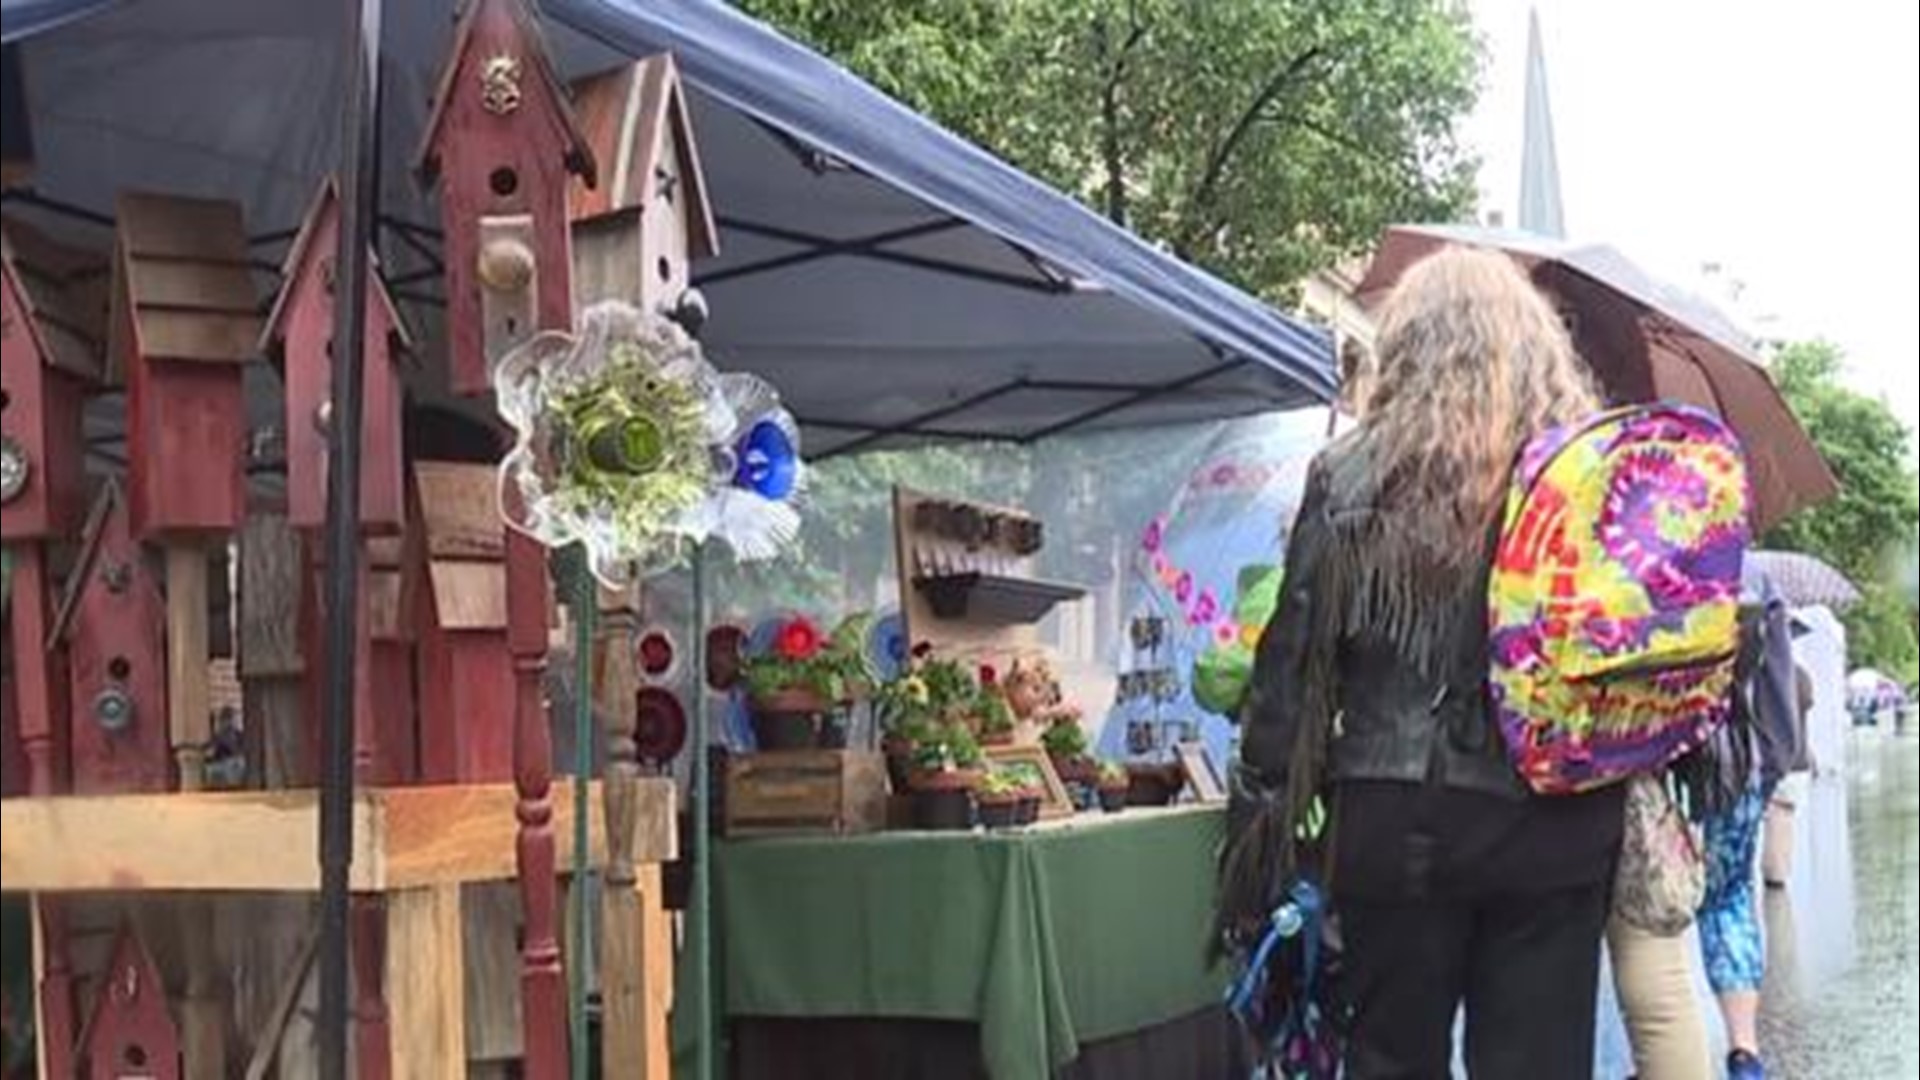 York business to host 'Mother's Day Street Fair'